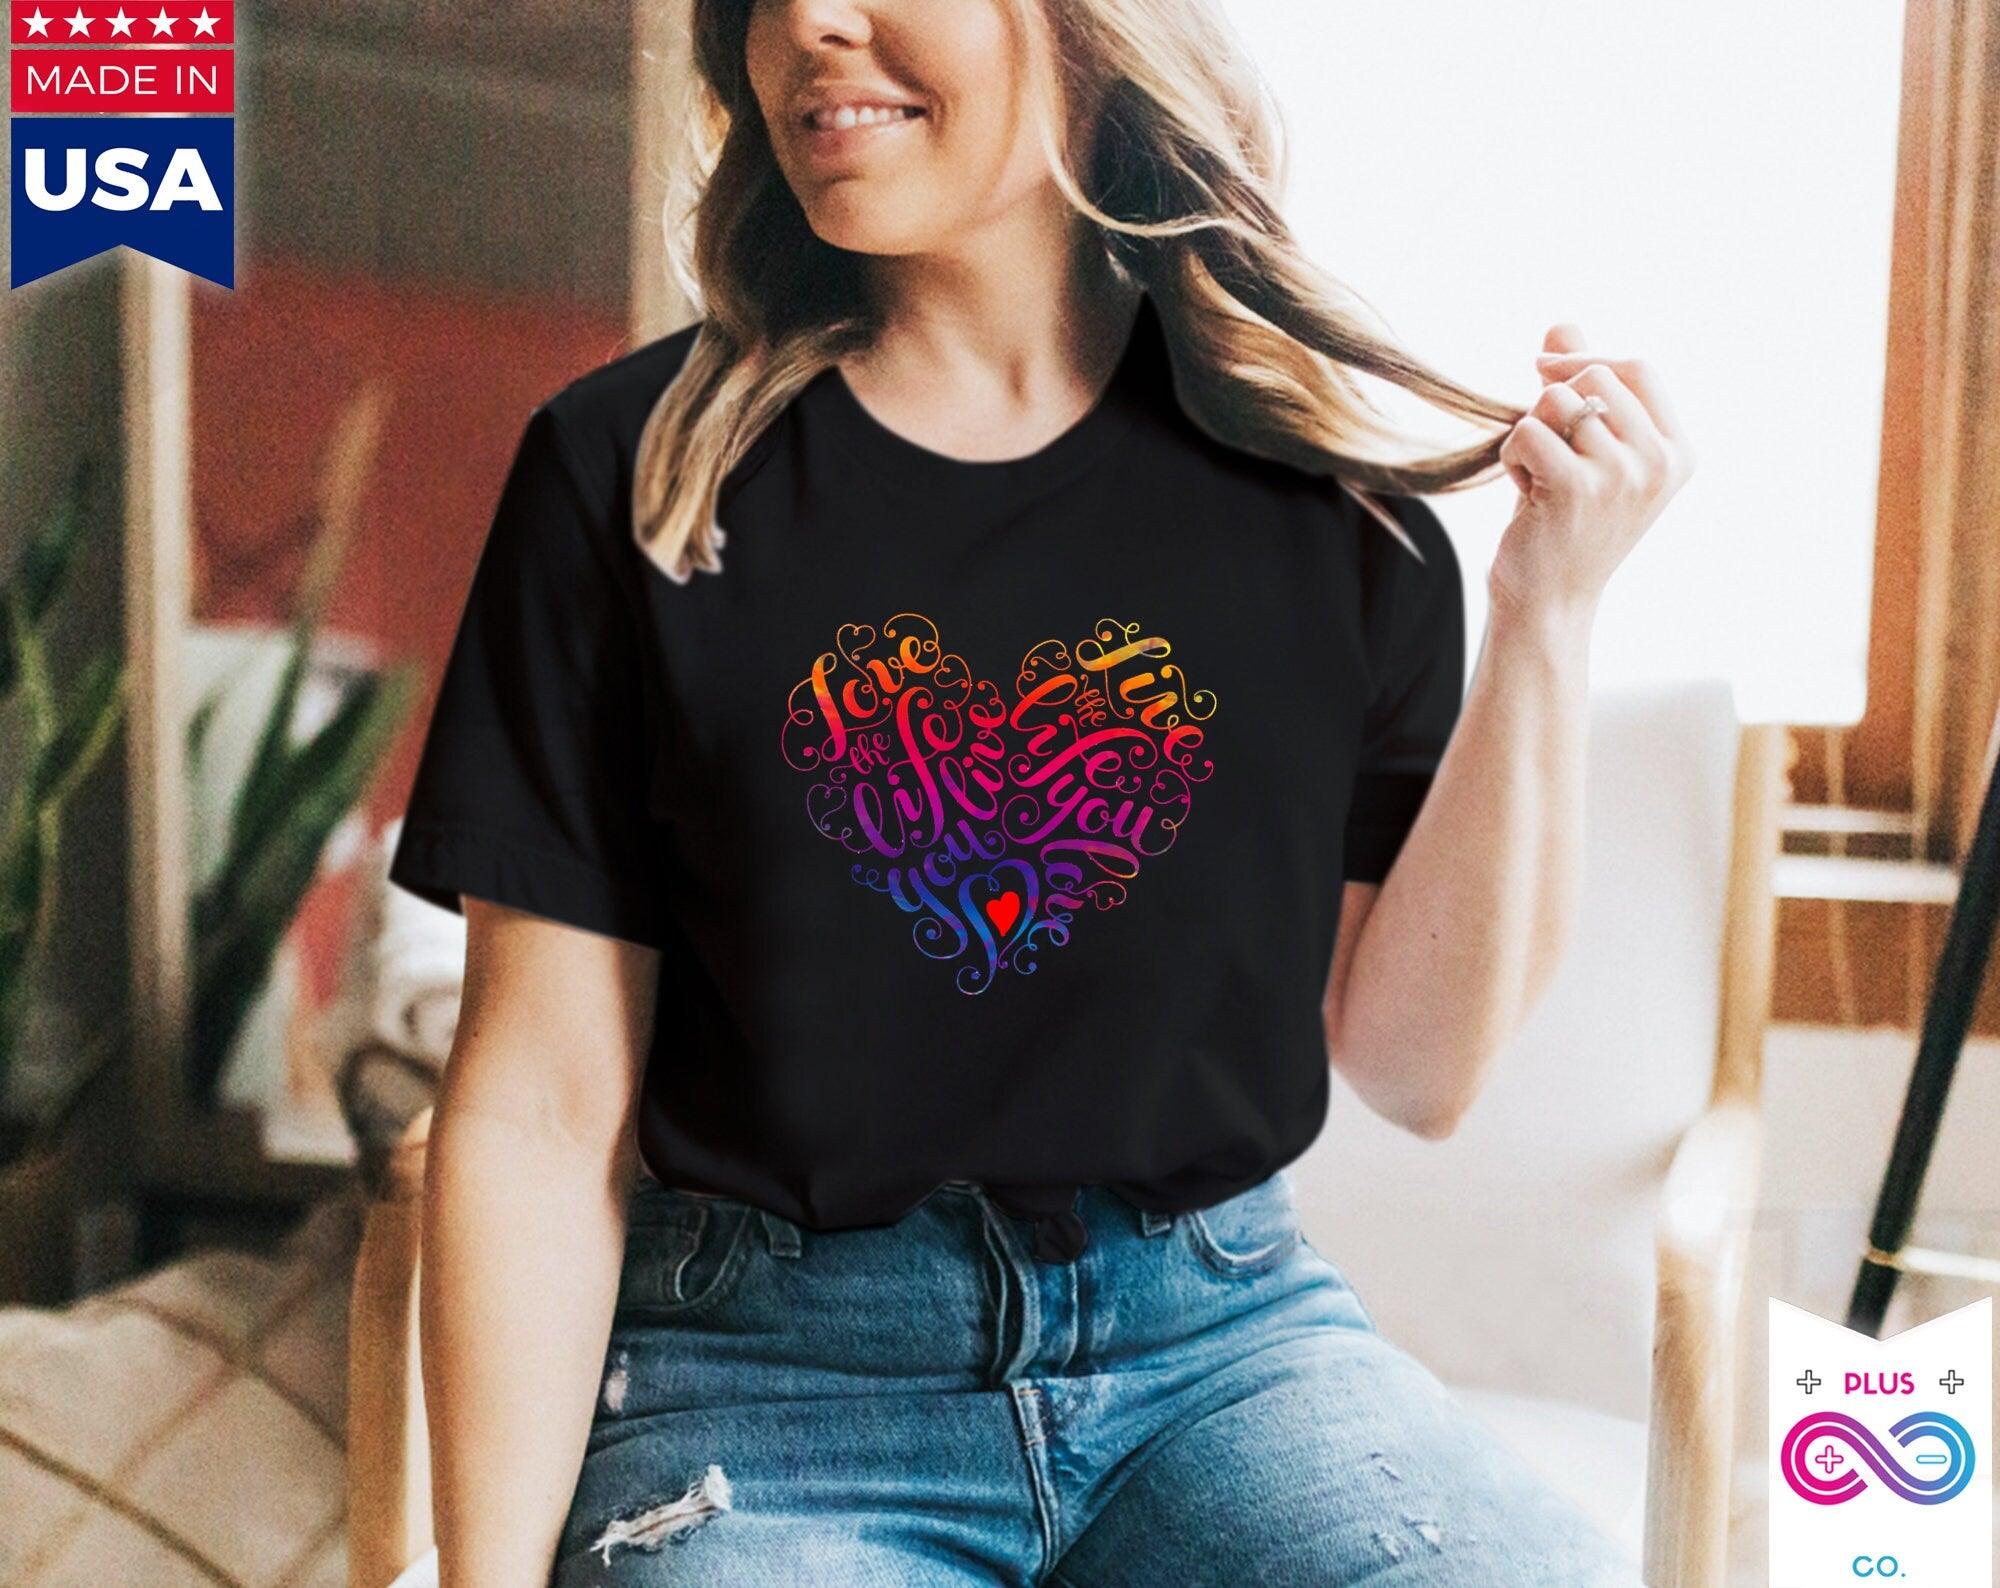 Love The Life You Live Black T-Shirts, Valentine's day gift idea,Good Vibe Tribe Tee, Gift for Mom, Gift For Her, Love - plusminusco.com